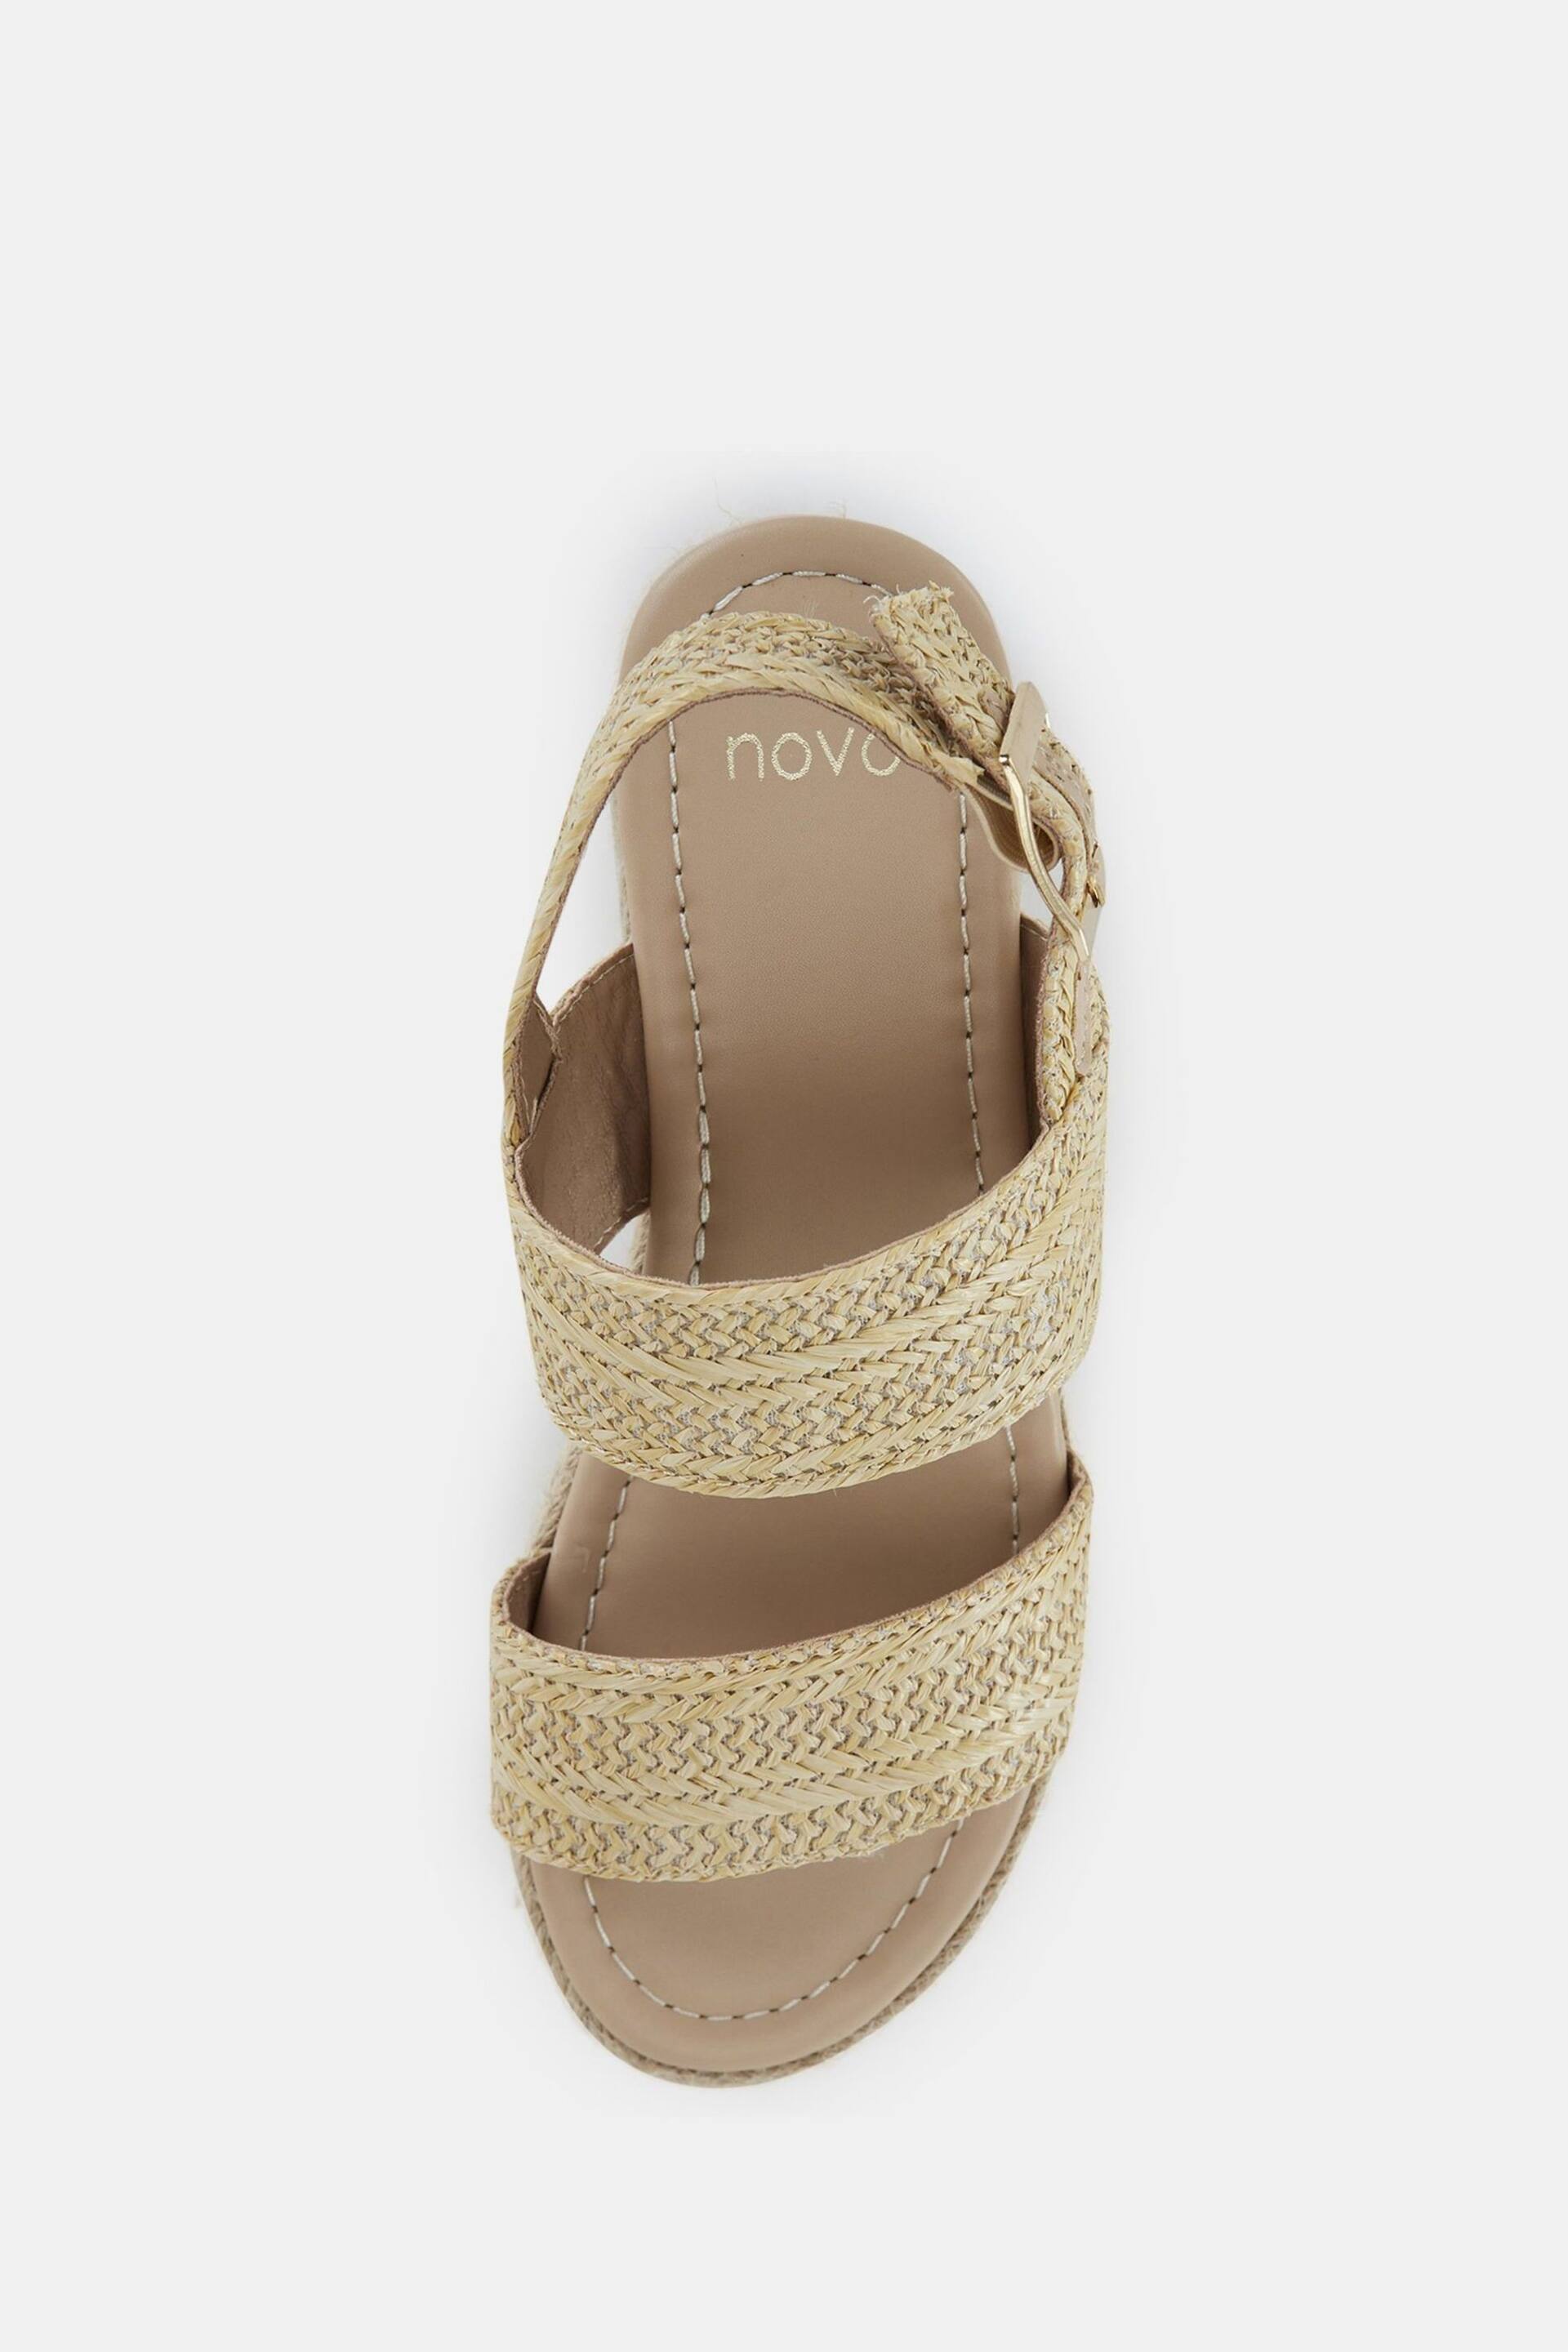 Novo Natural Wide Fit Sadie Espadrille Double Strap Sandals - Image 5 of 6